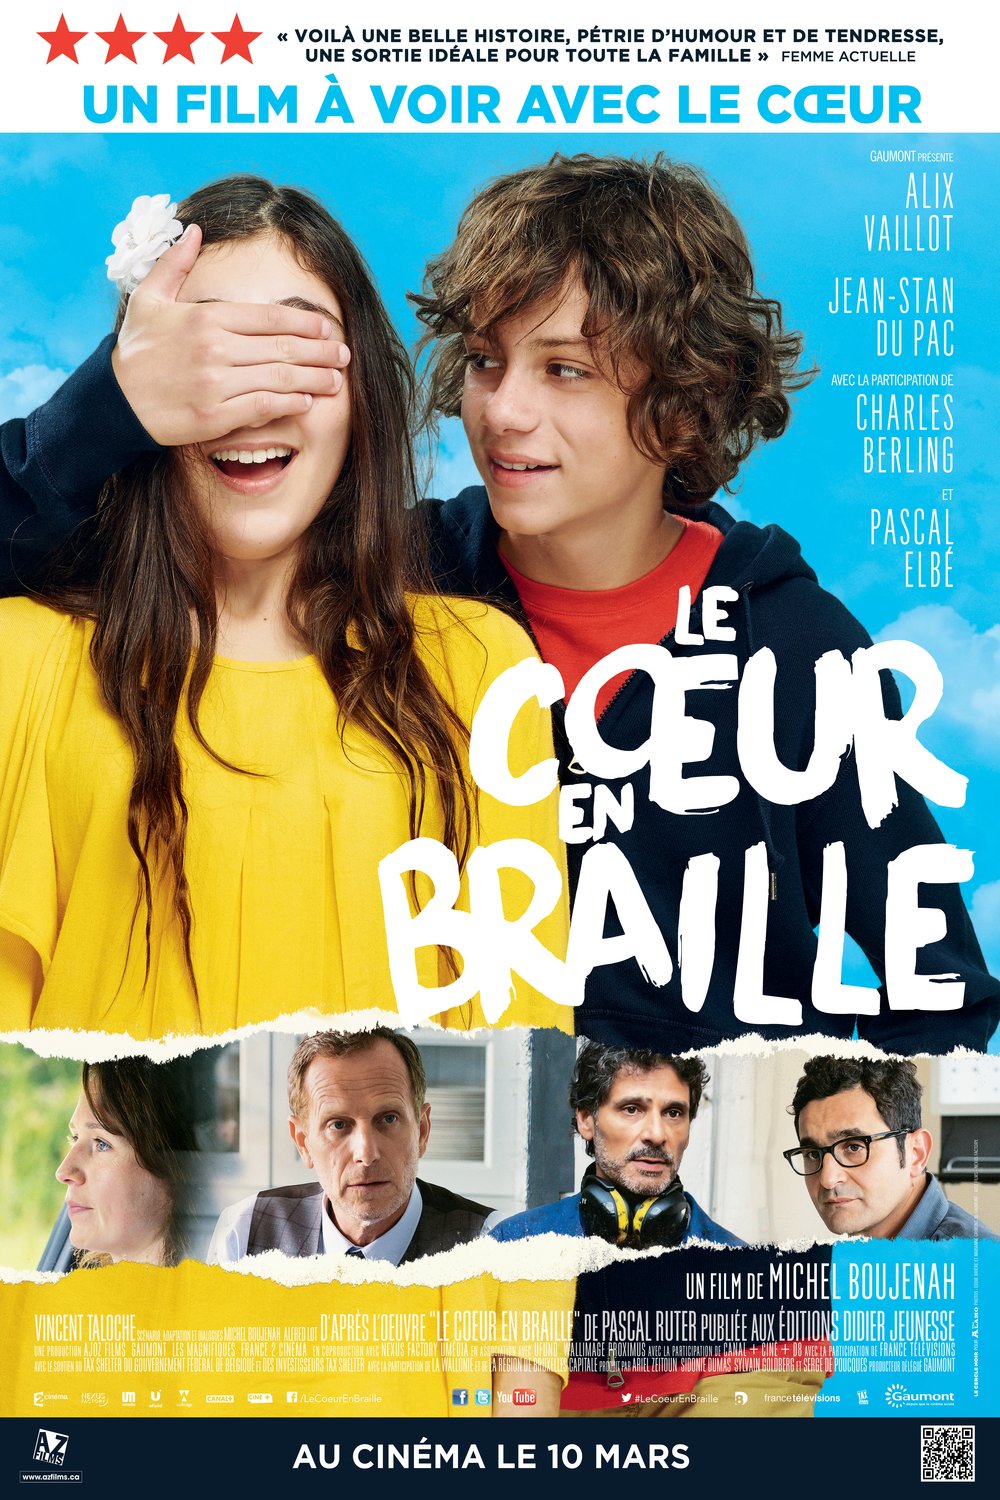 Poster of the movie Le Coeur en braille